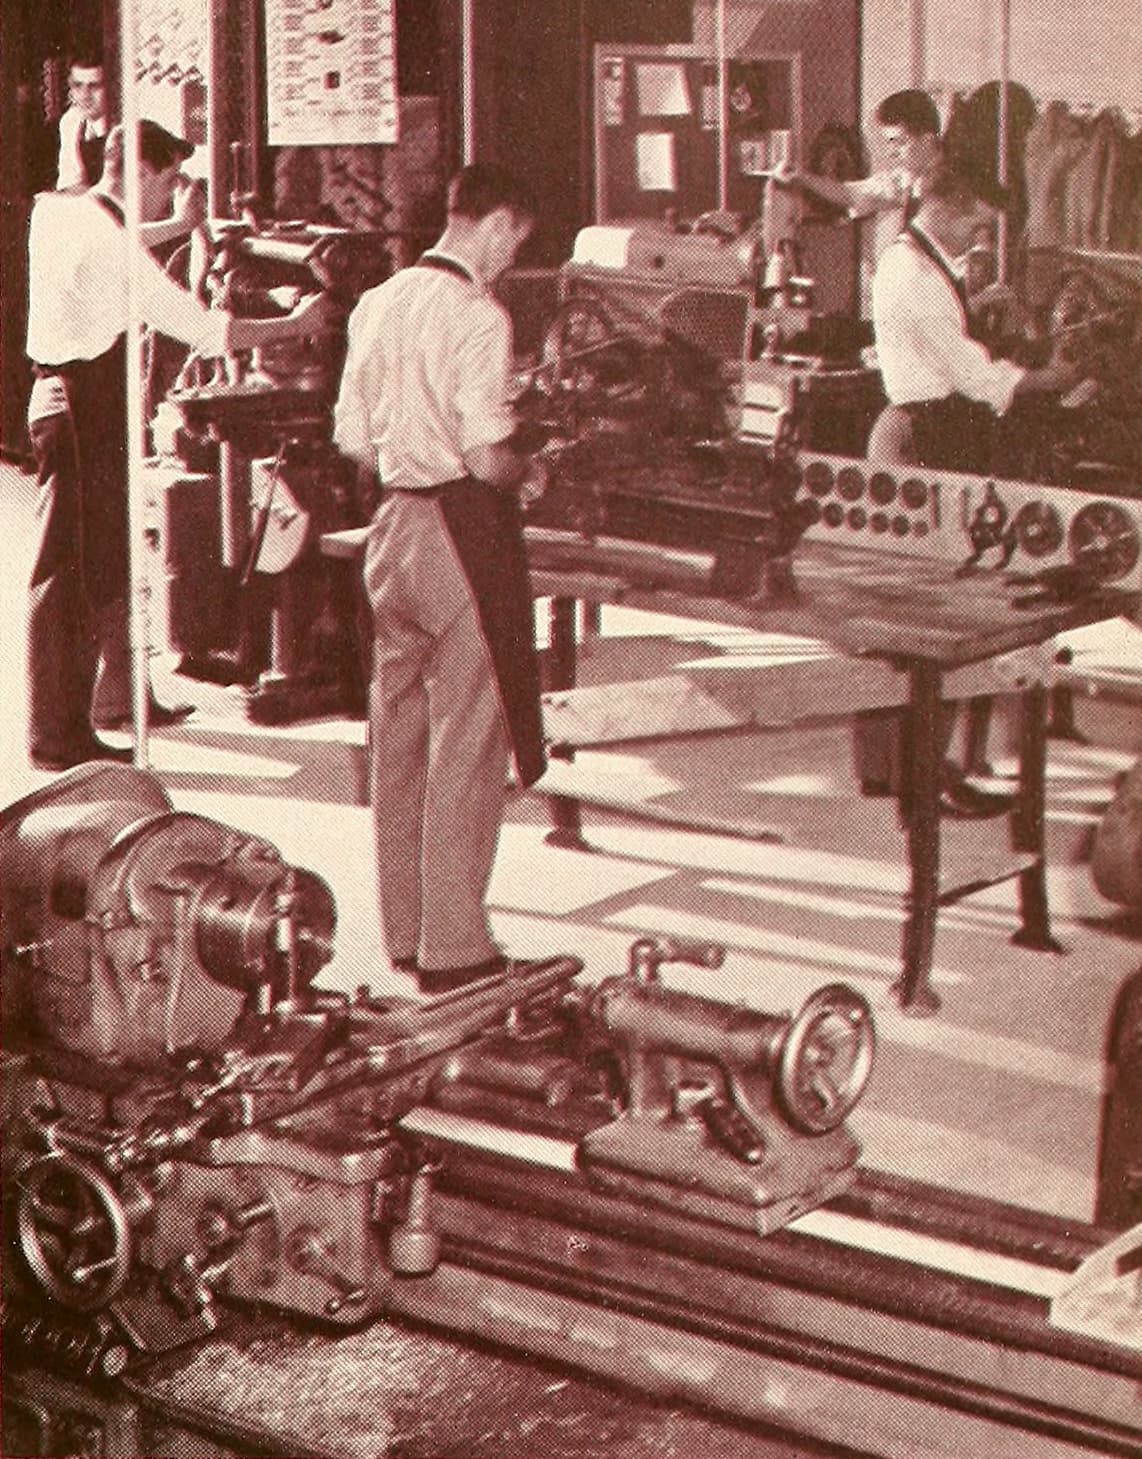 The Industrial Management Laboratory, 1950